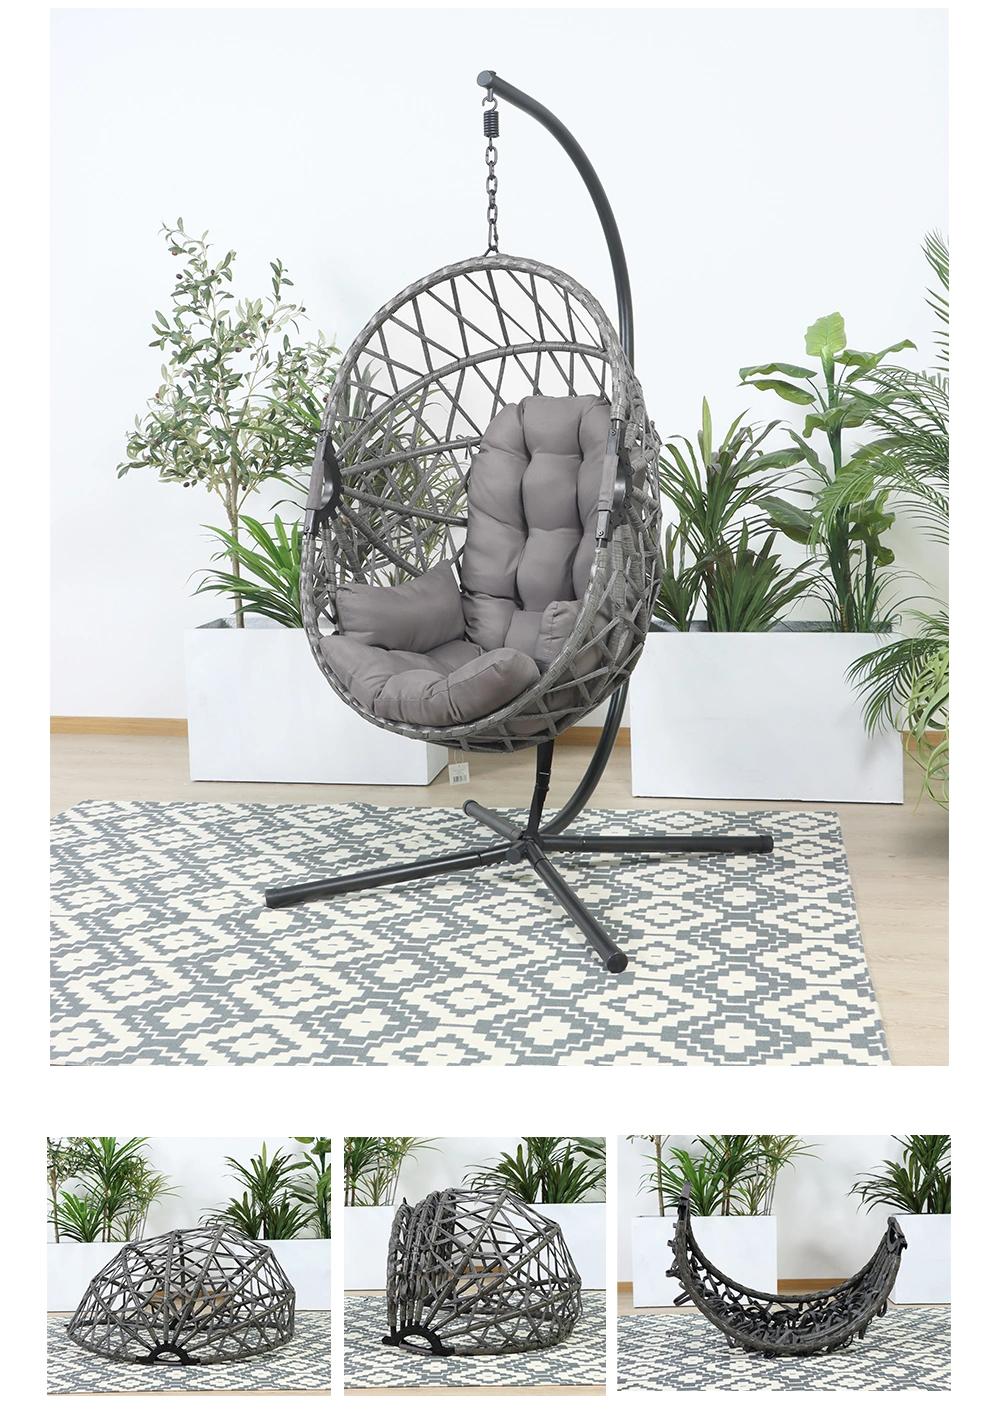 New Arrival Outdoor Patio Egg Swing Chair, Original Design Patio Swings Hanging Chair